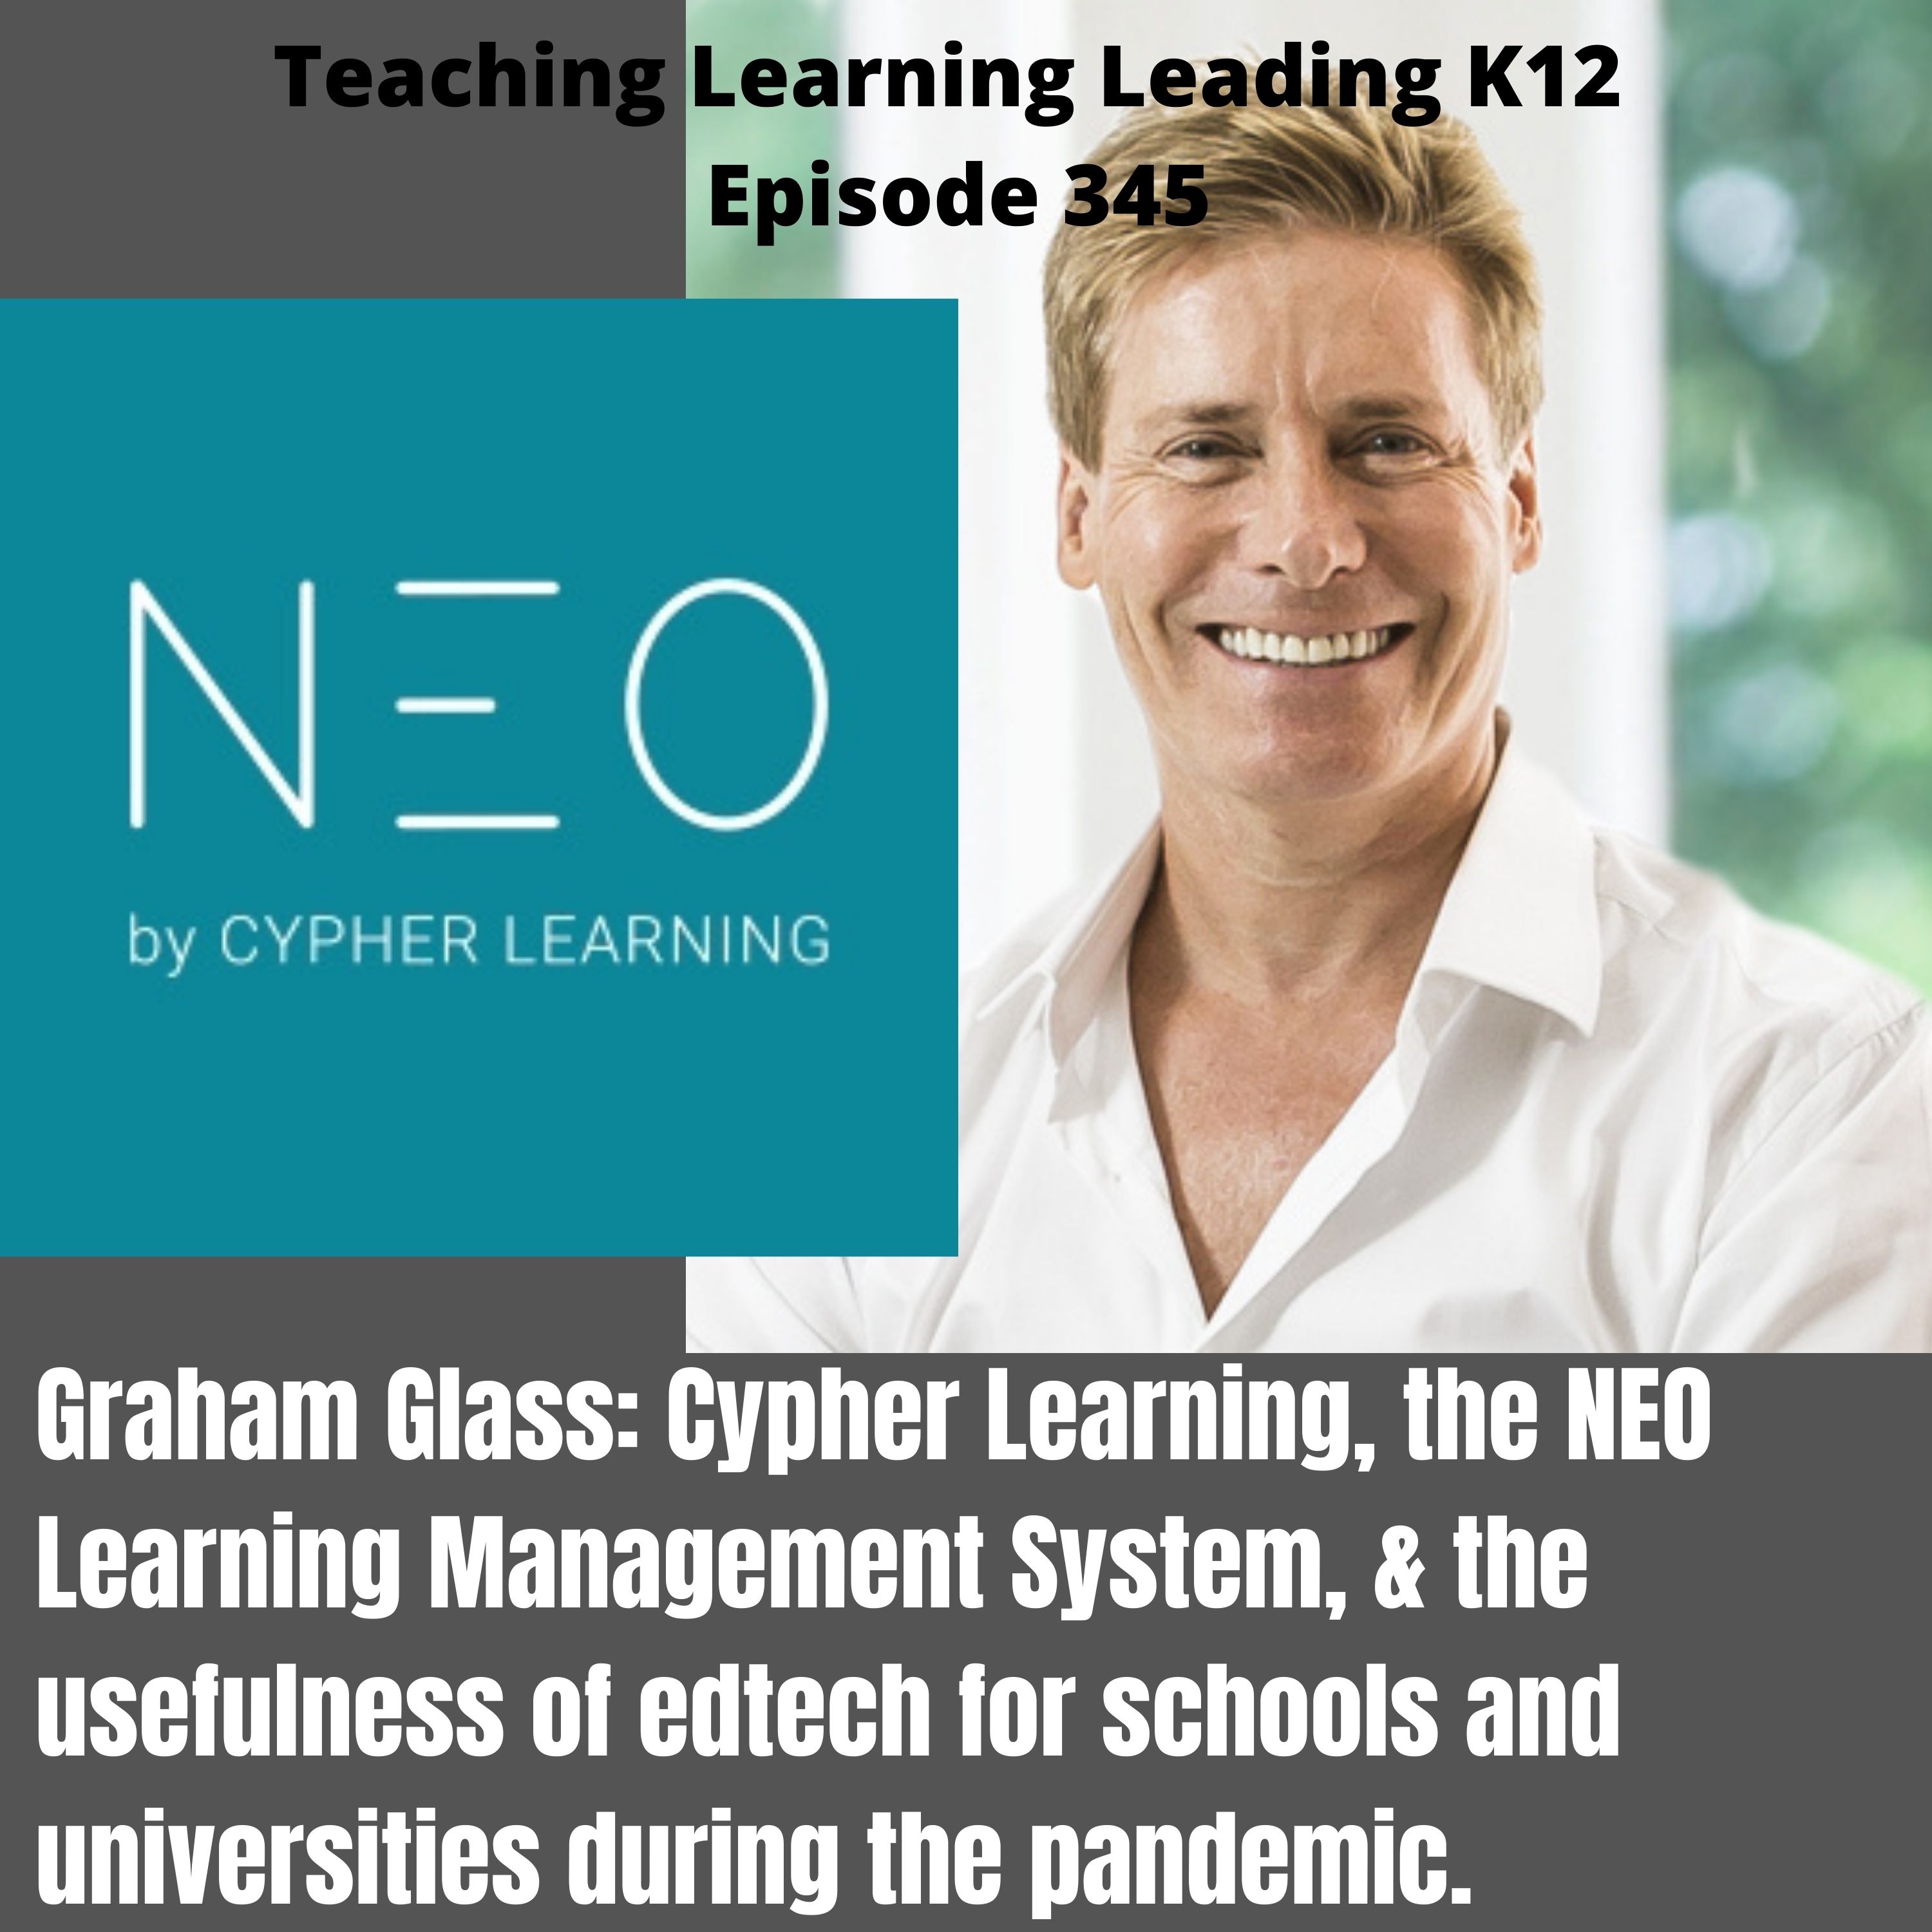 Graham Glass: Cypher Learning, the NEO Learning Management System, and the Usefulness of Edtech During the Pandemic - 345 Image